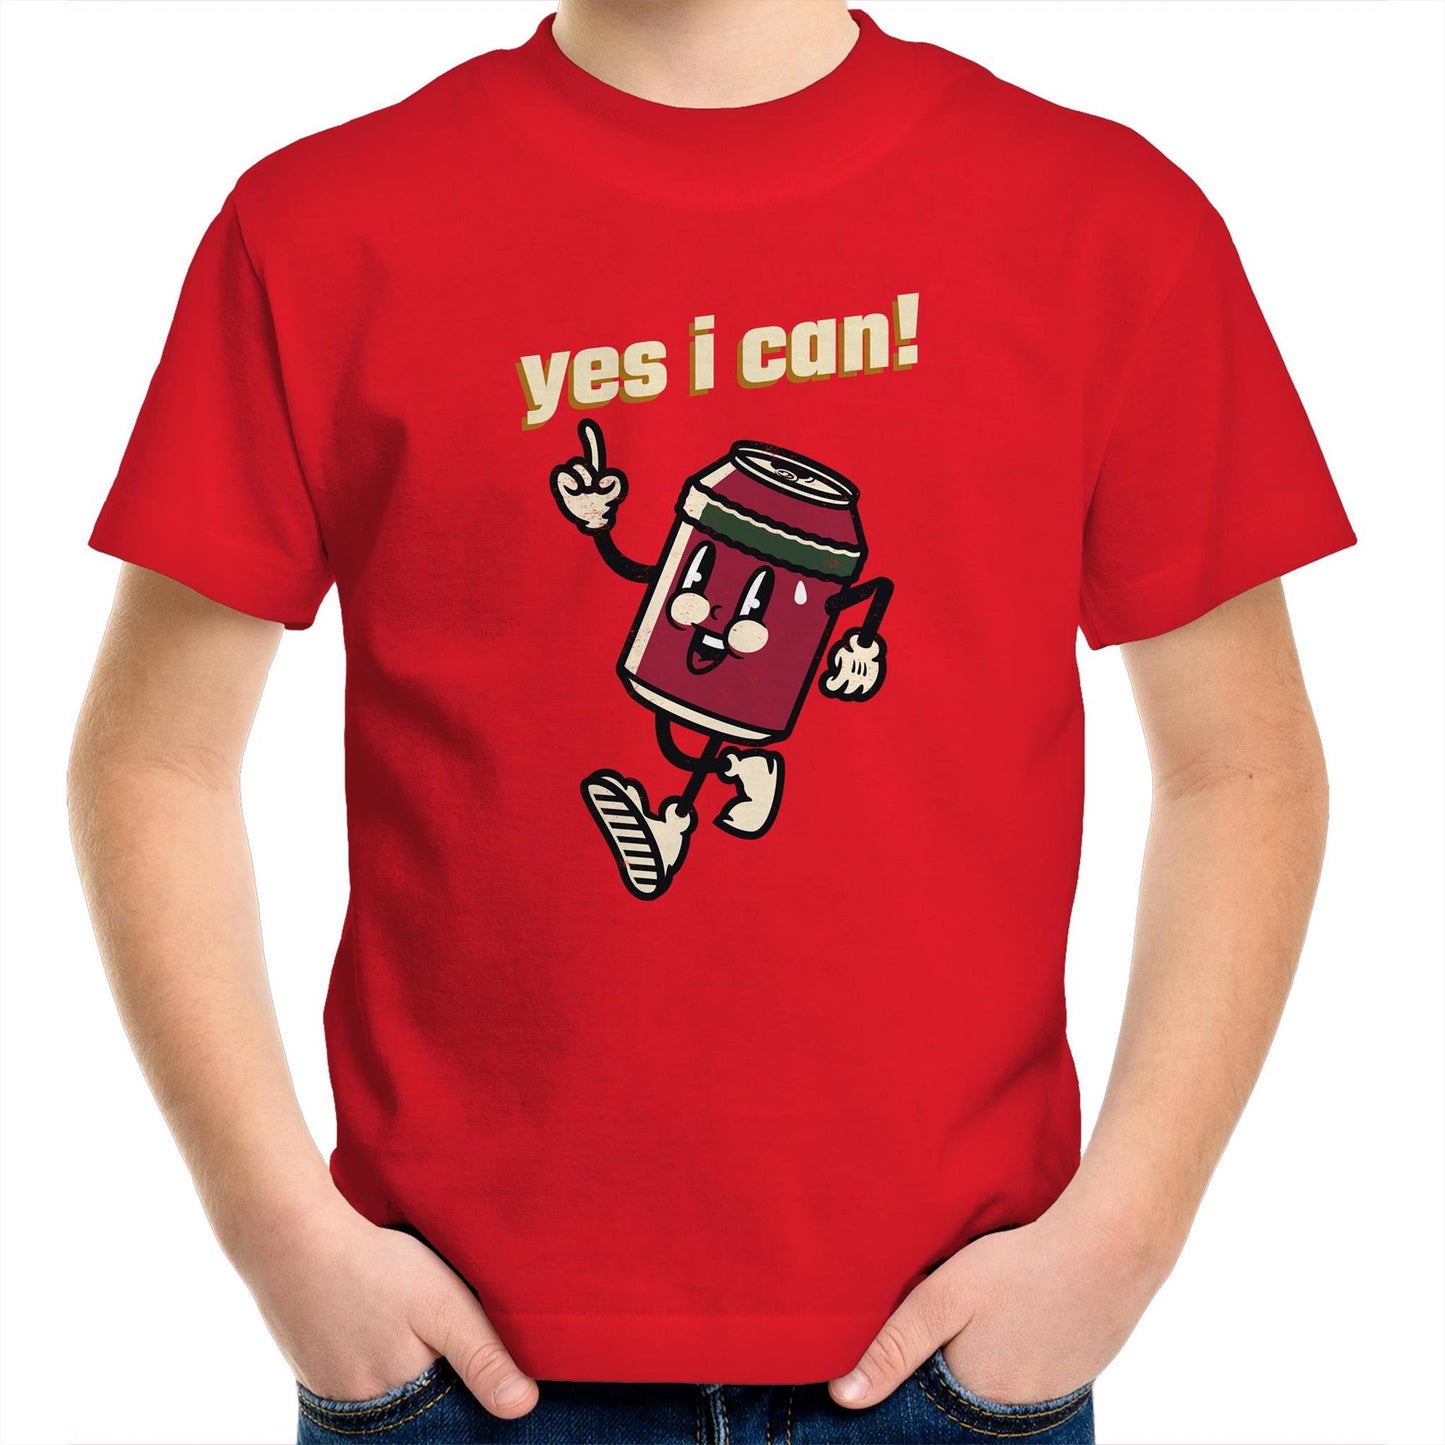 Yes I Can! - Kids Youth Crew T-Shirt Red Kids Youth T-shirt Motivation Retro